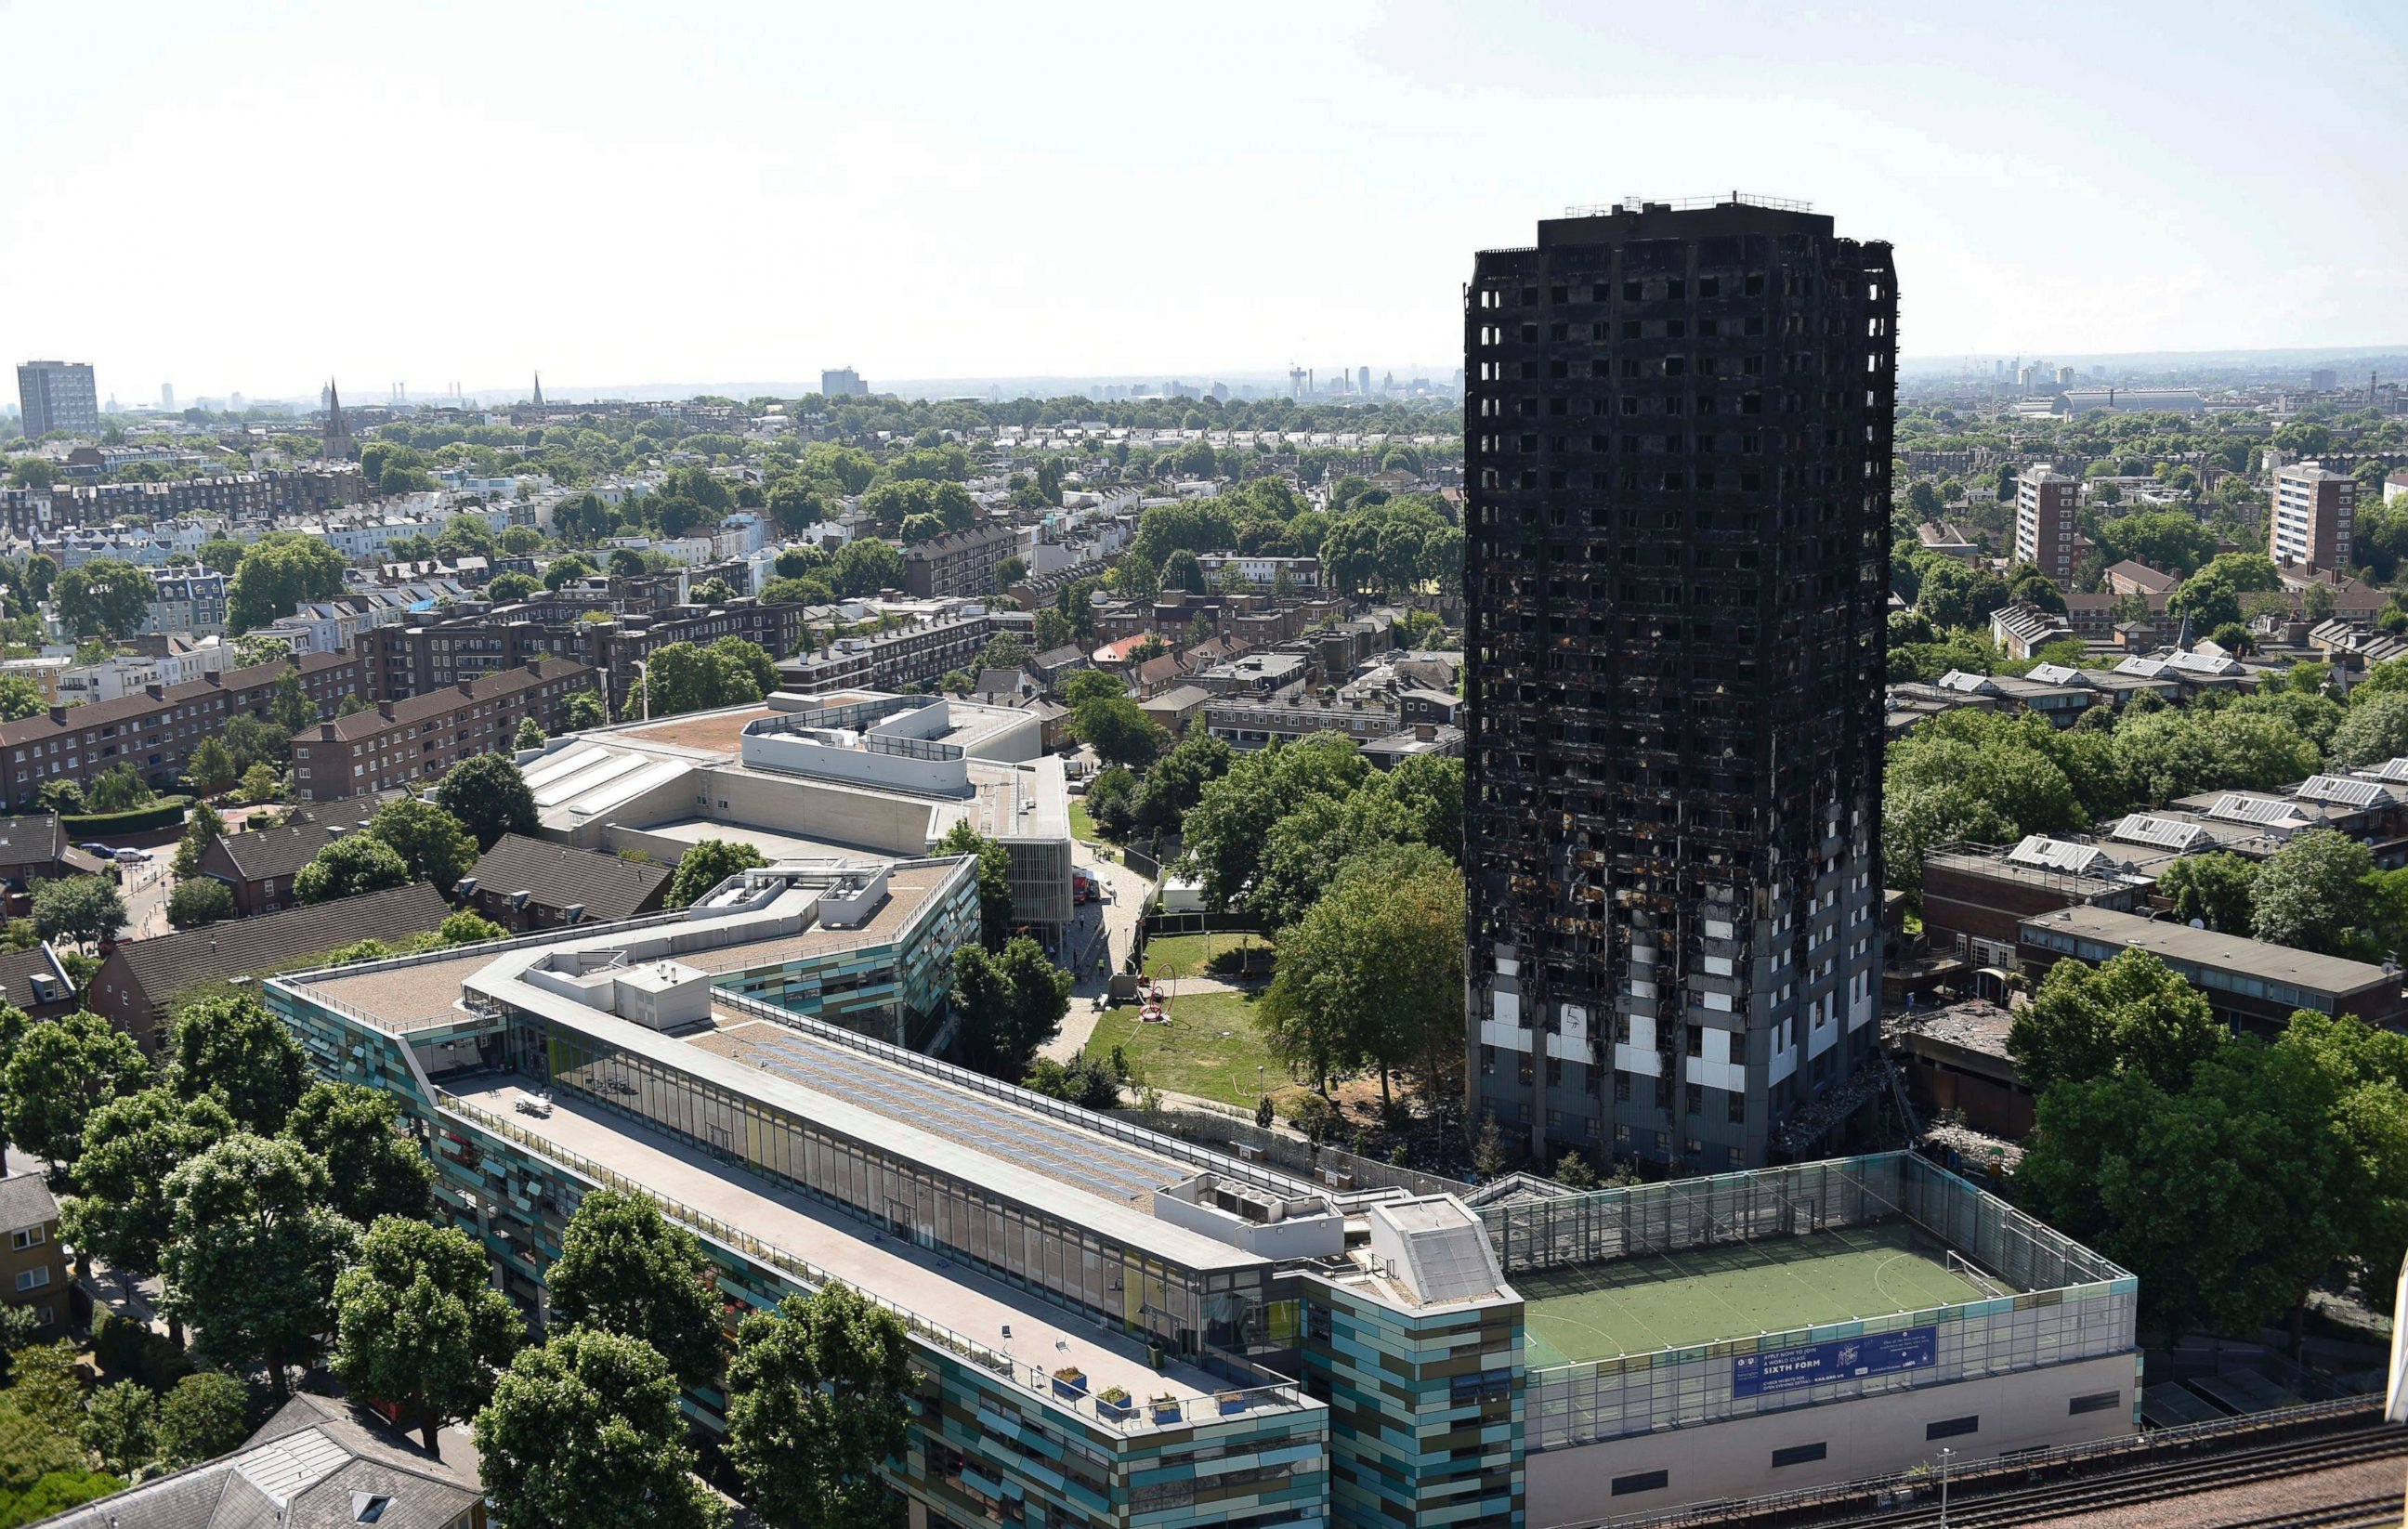 PHOTO: Grenfell Tower is pictured on June 17, 2017 in west London after a fire engulfed the 24-storey building on Wednesday morning.  